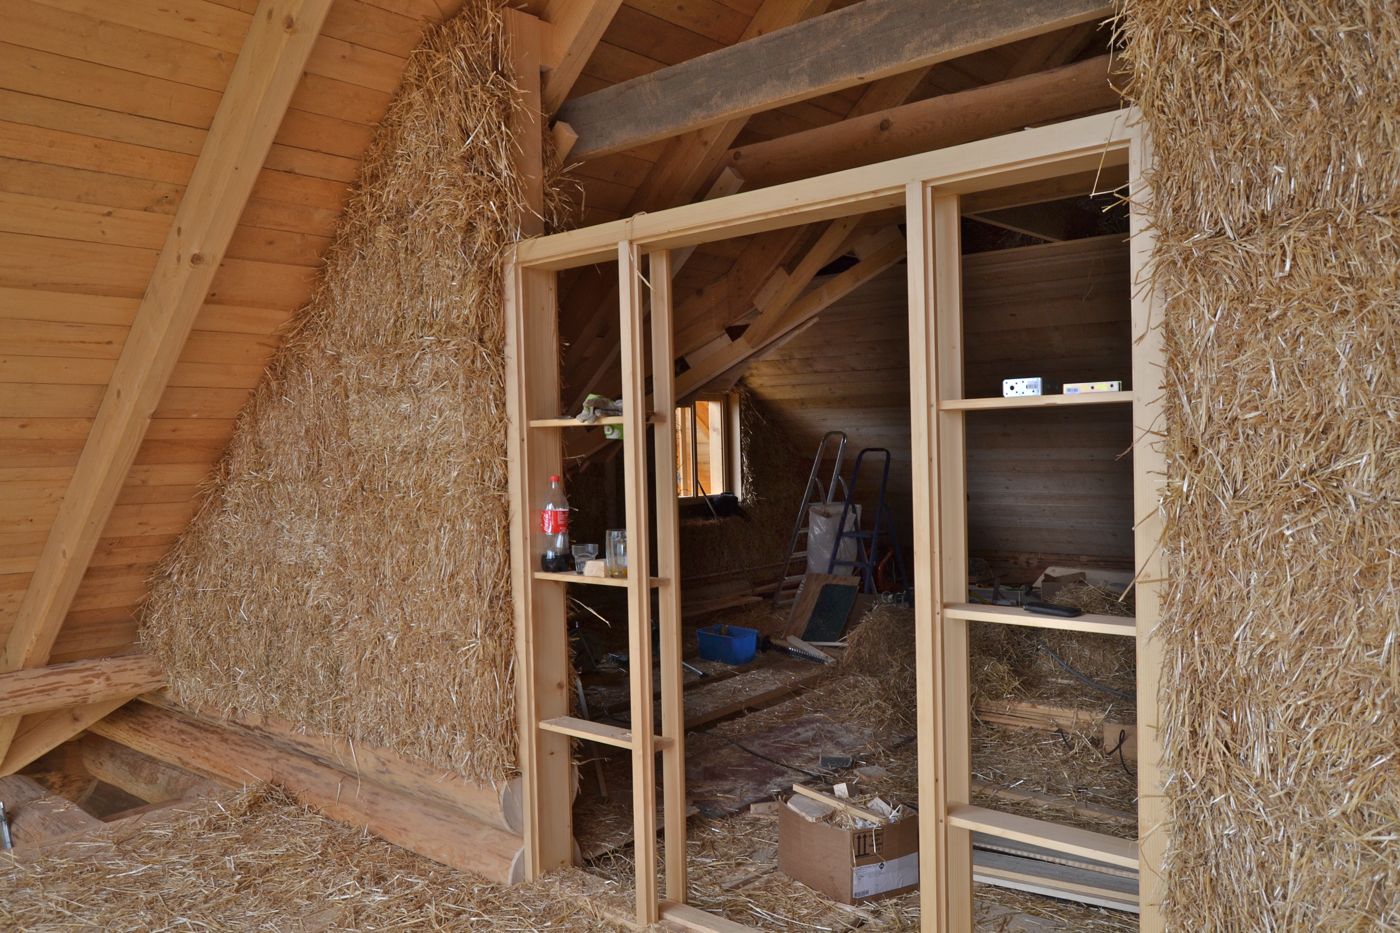 Straw bale infill gable walls and roof Upper Austria